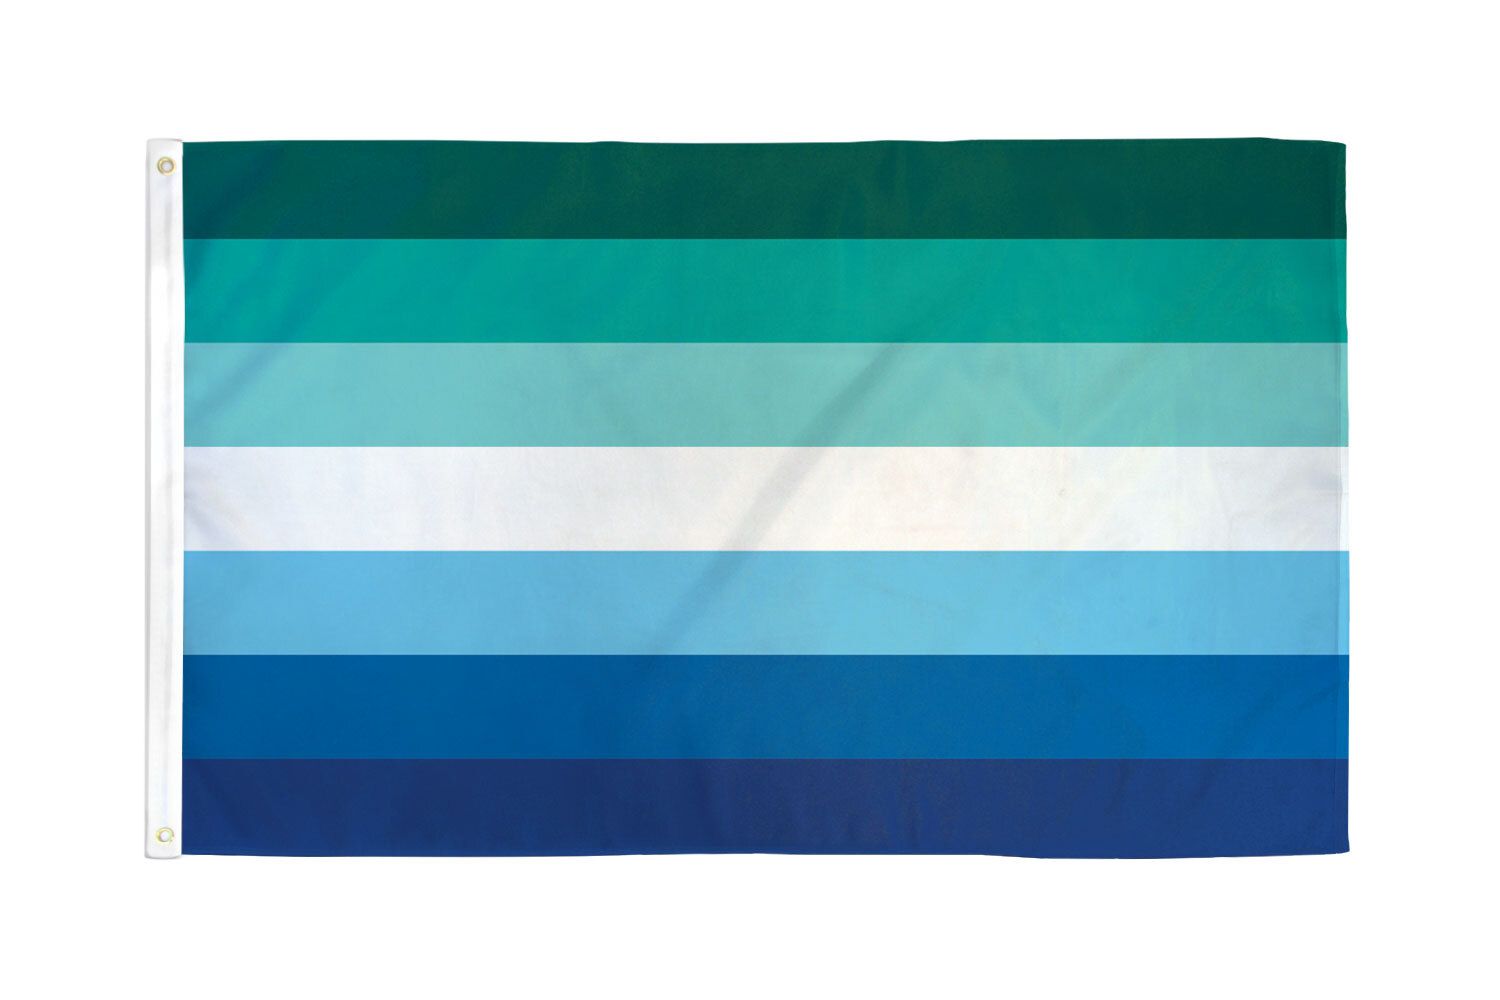 Gay Male Pride Flag 3'x5' Polyester